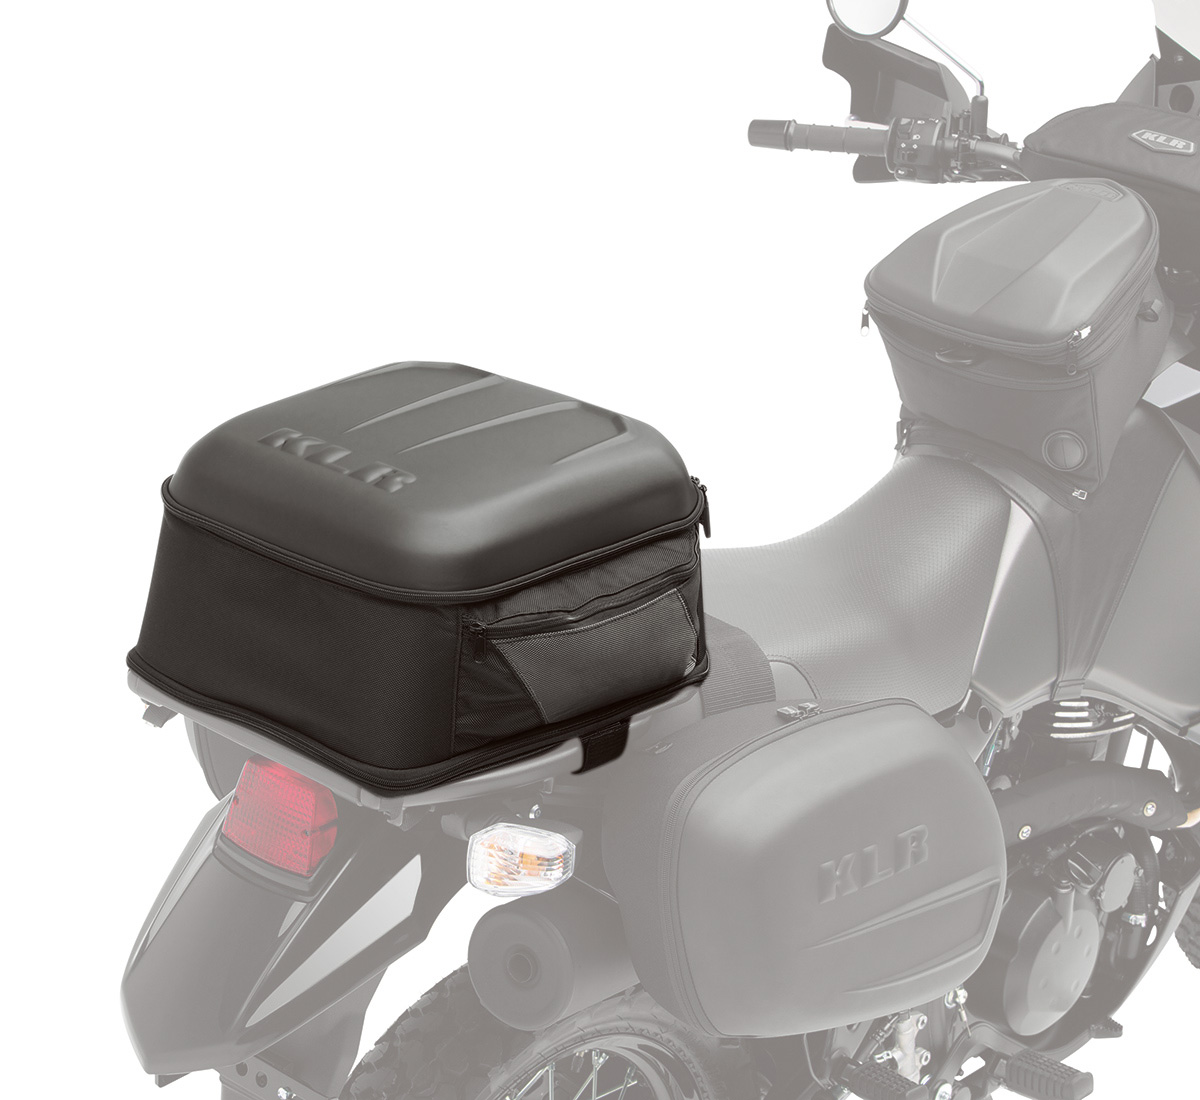 Motorcycle Accessories - KLR™650 New Edition